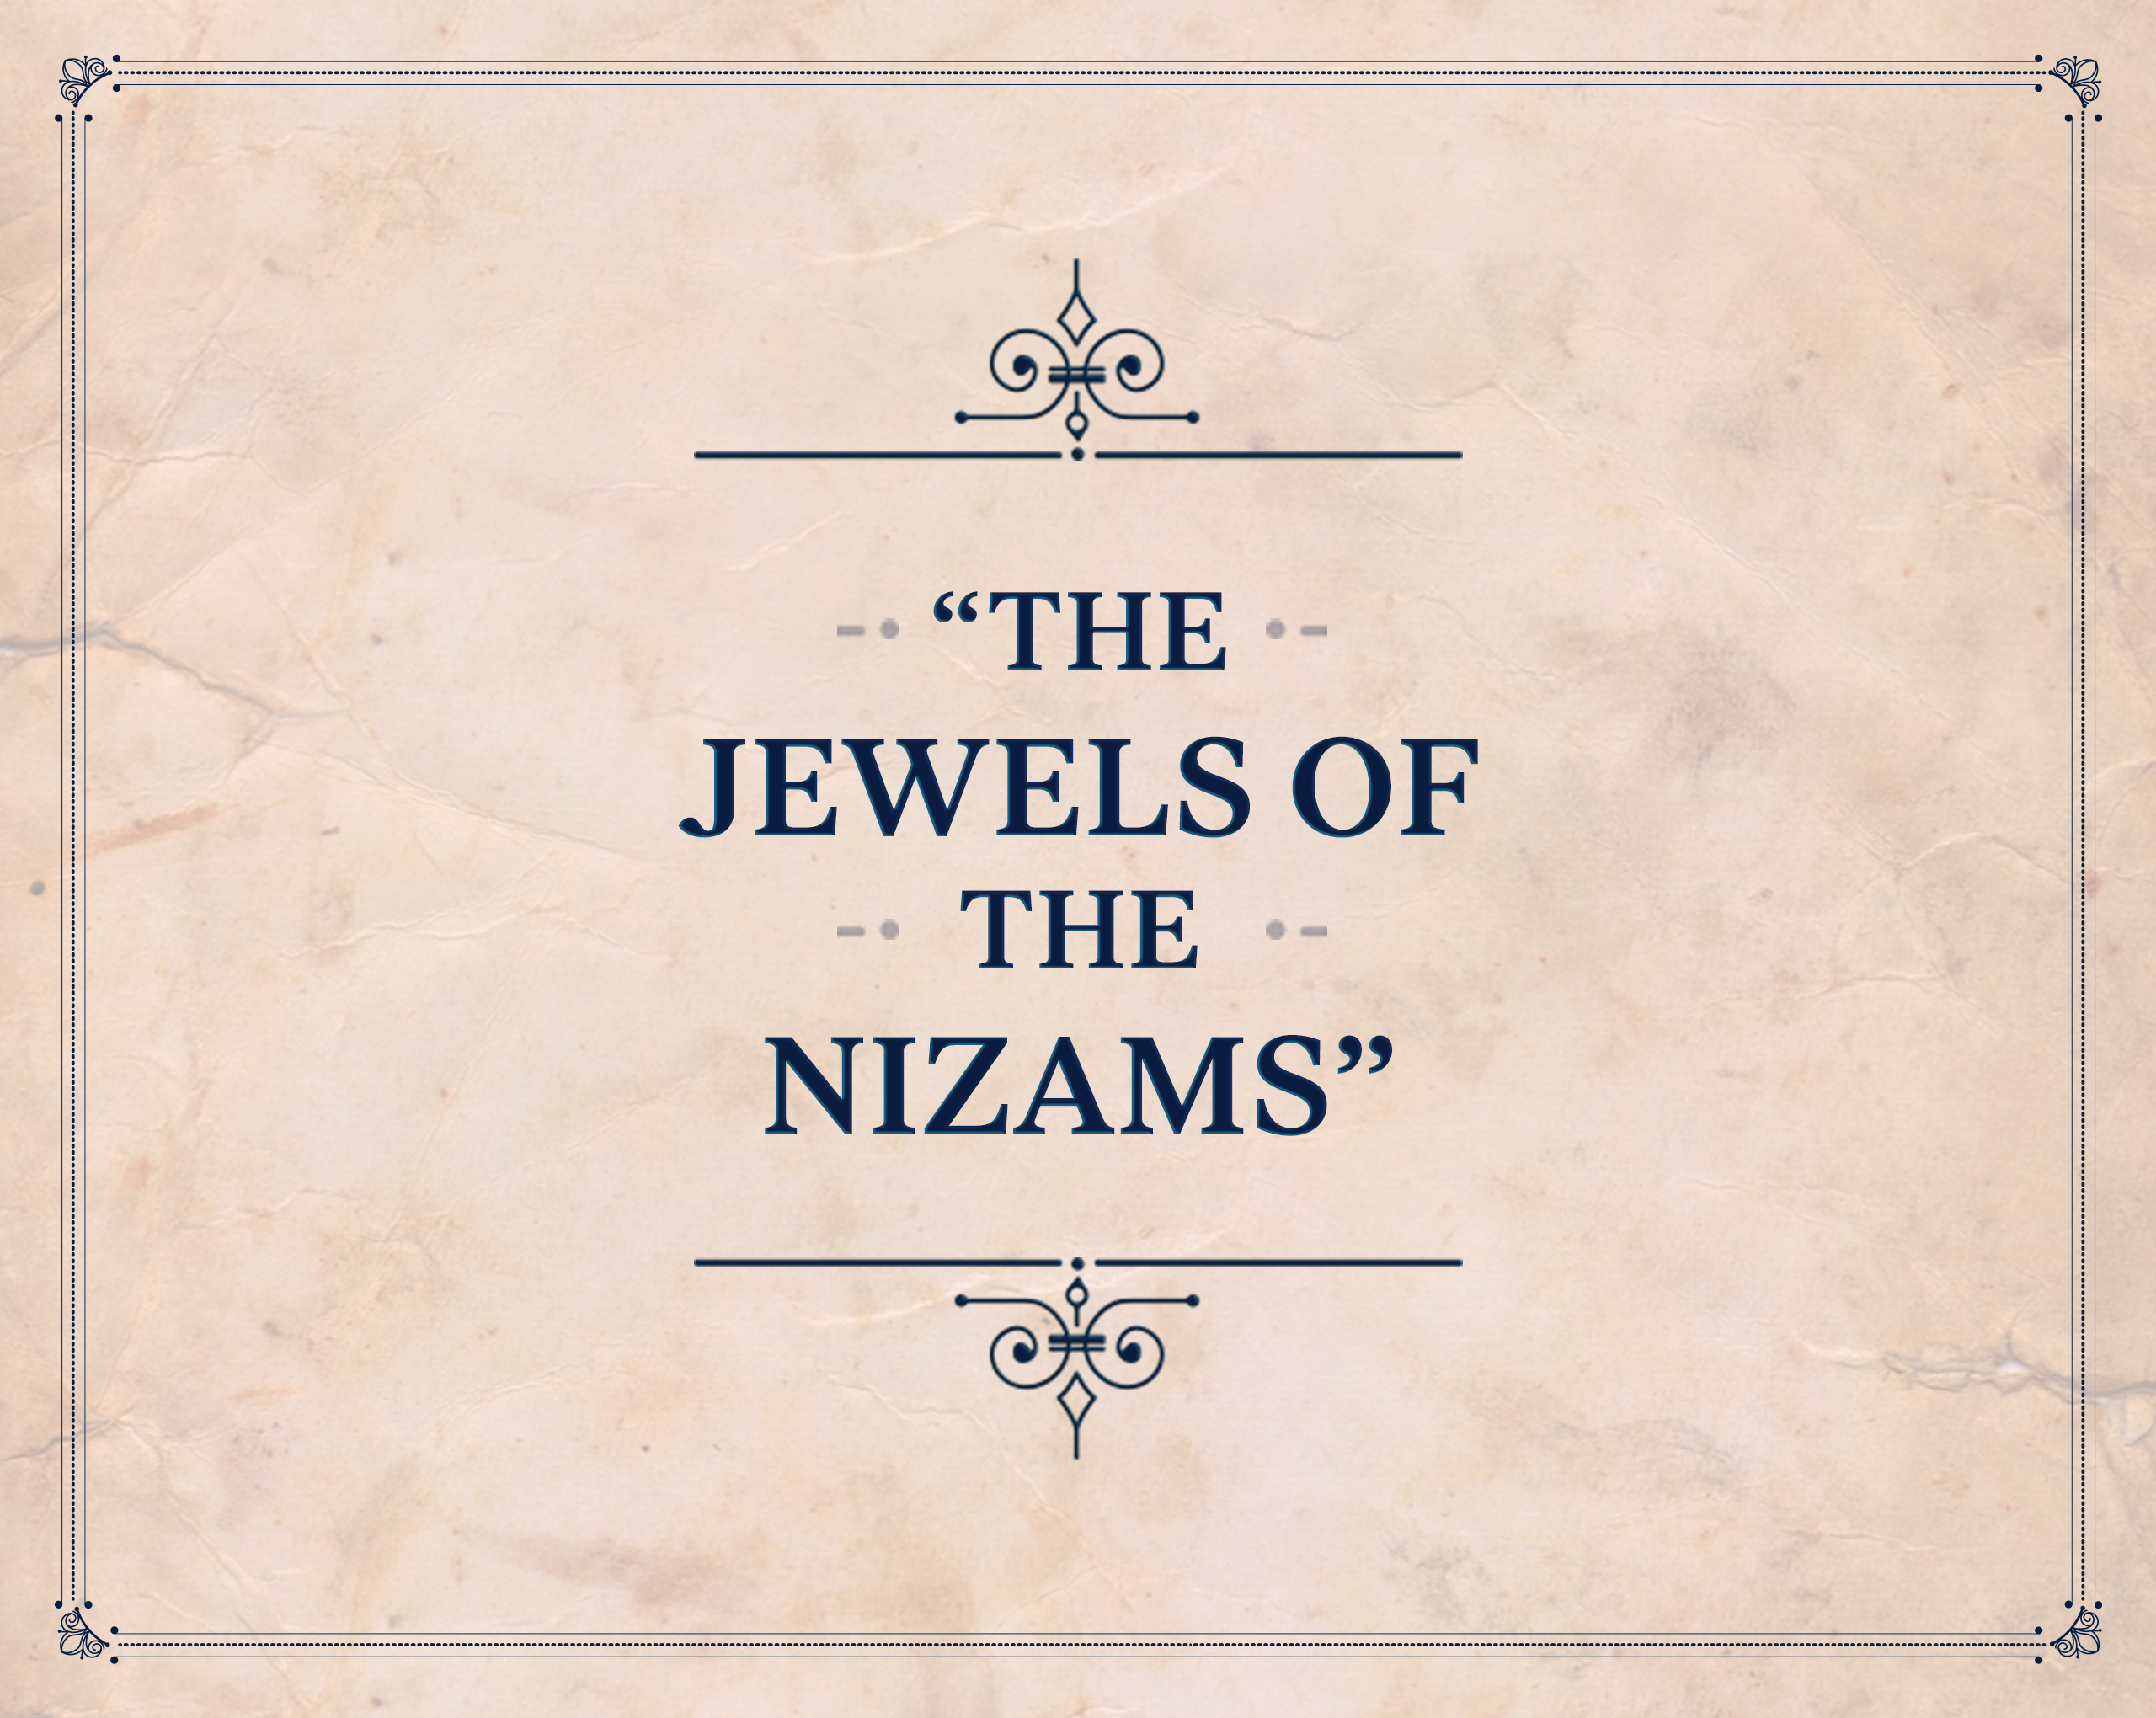 Jewels collection of Nizams